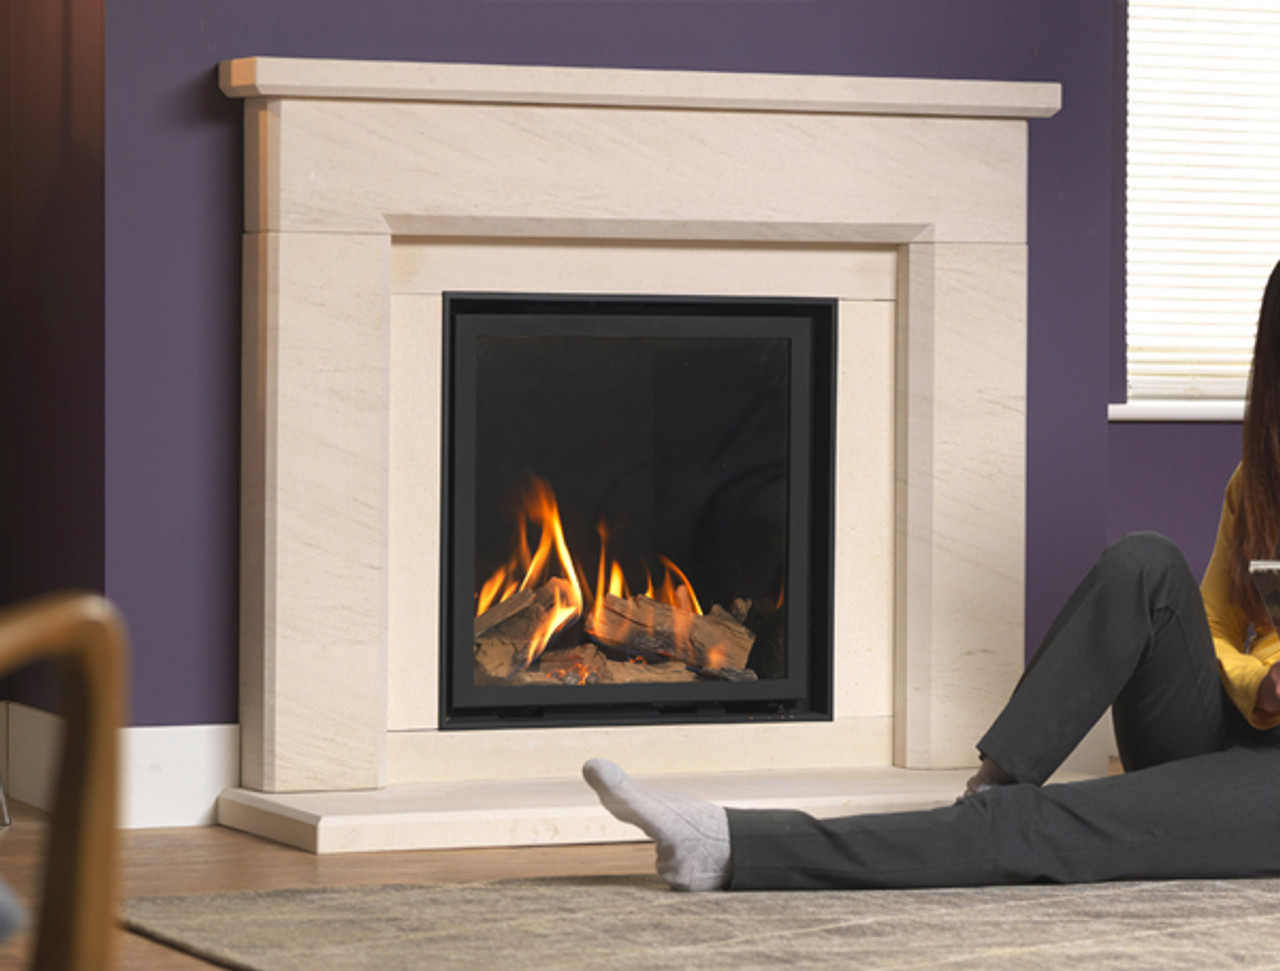 How To Close The Flue On A Gas Fireplace